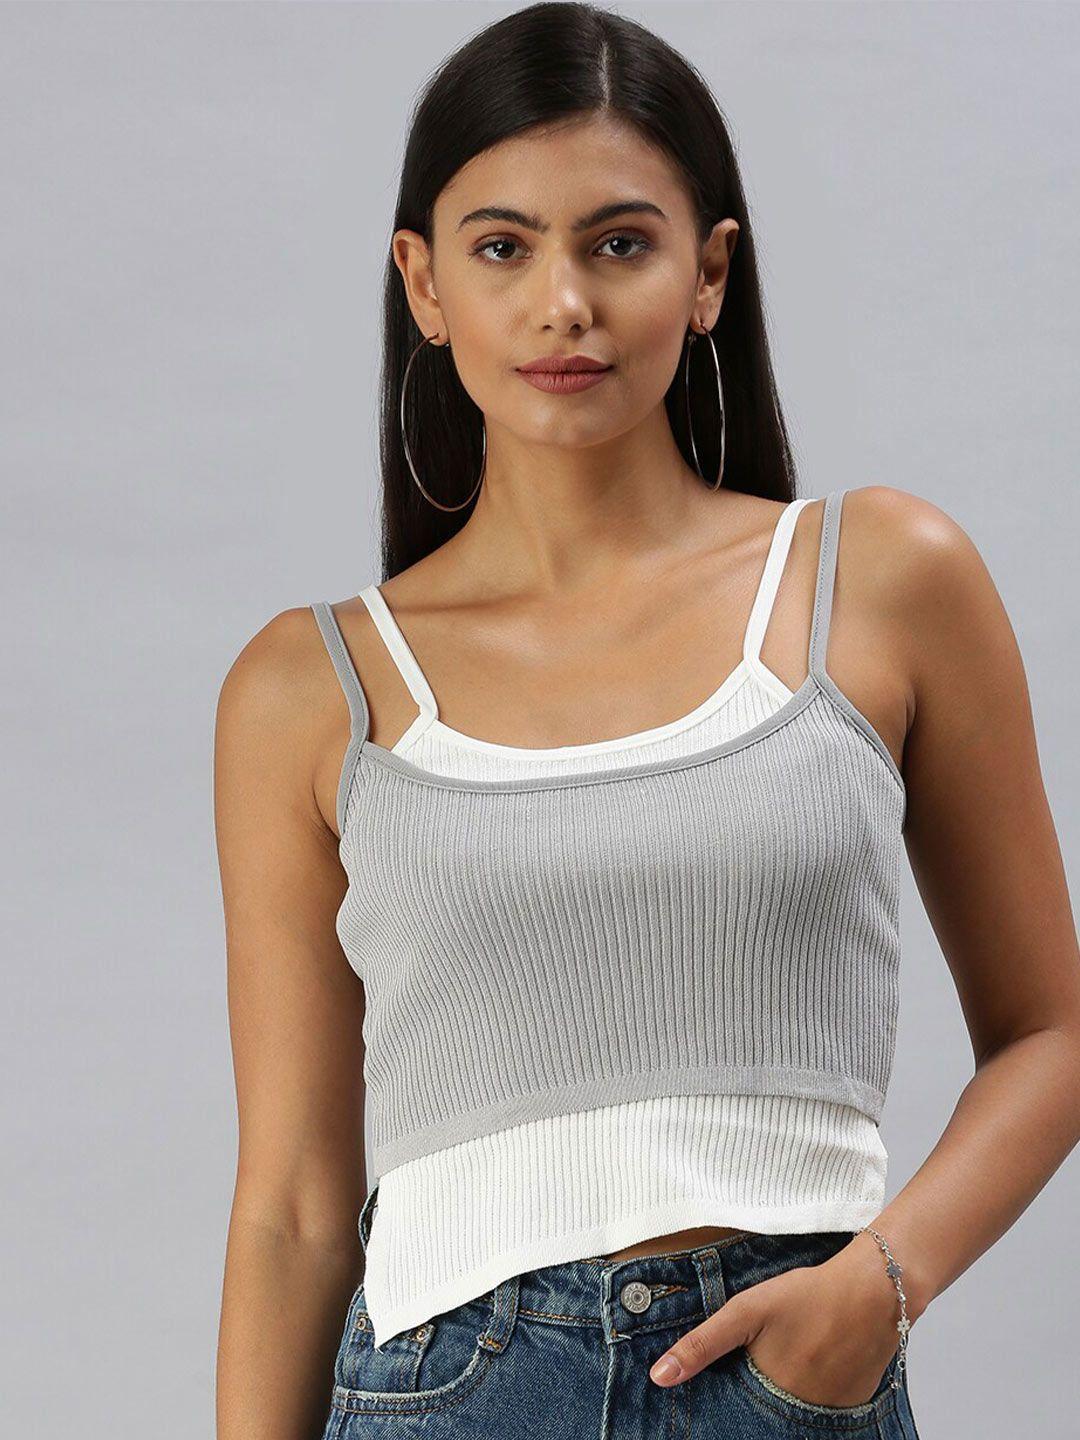 showoff-shoulder-straps-sleeveless-fitted-crop-top